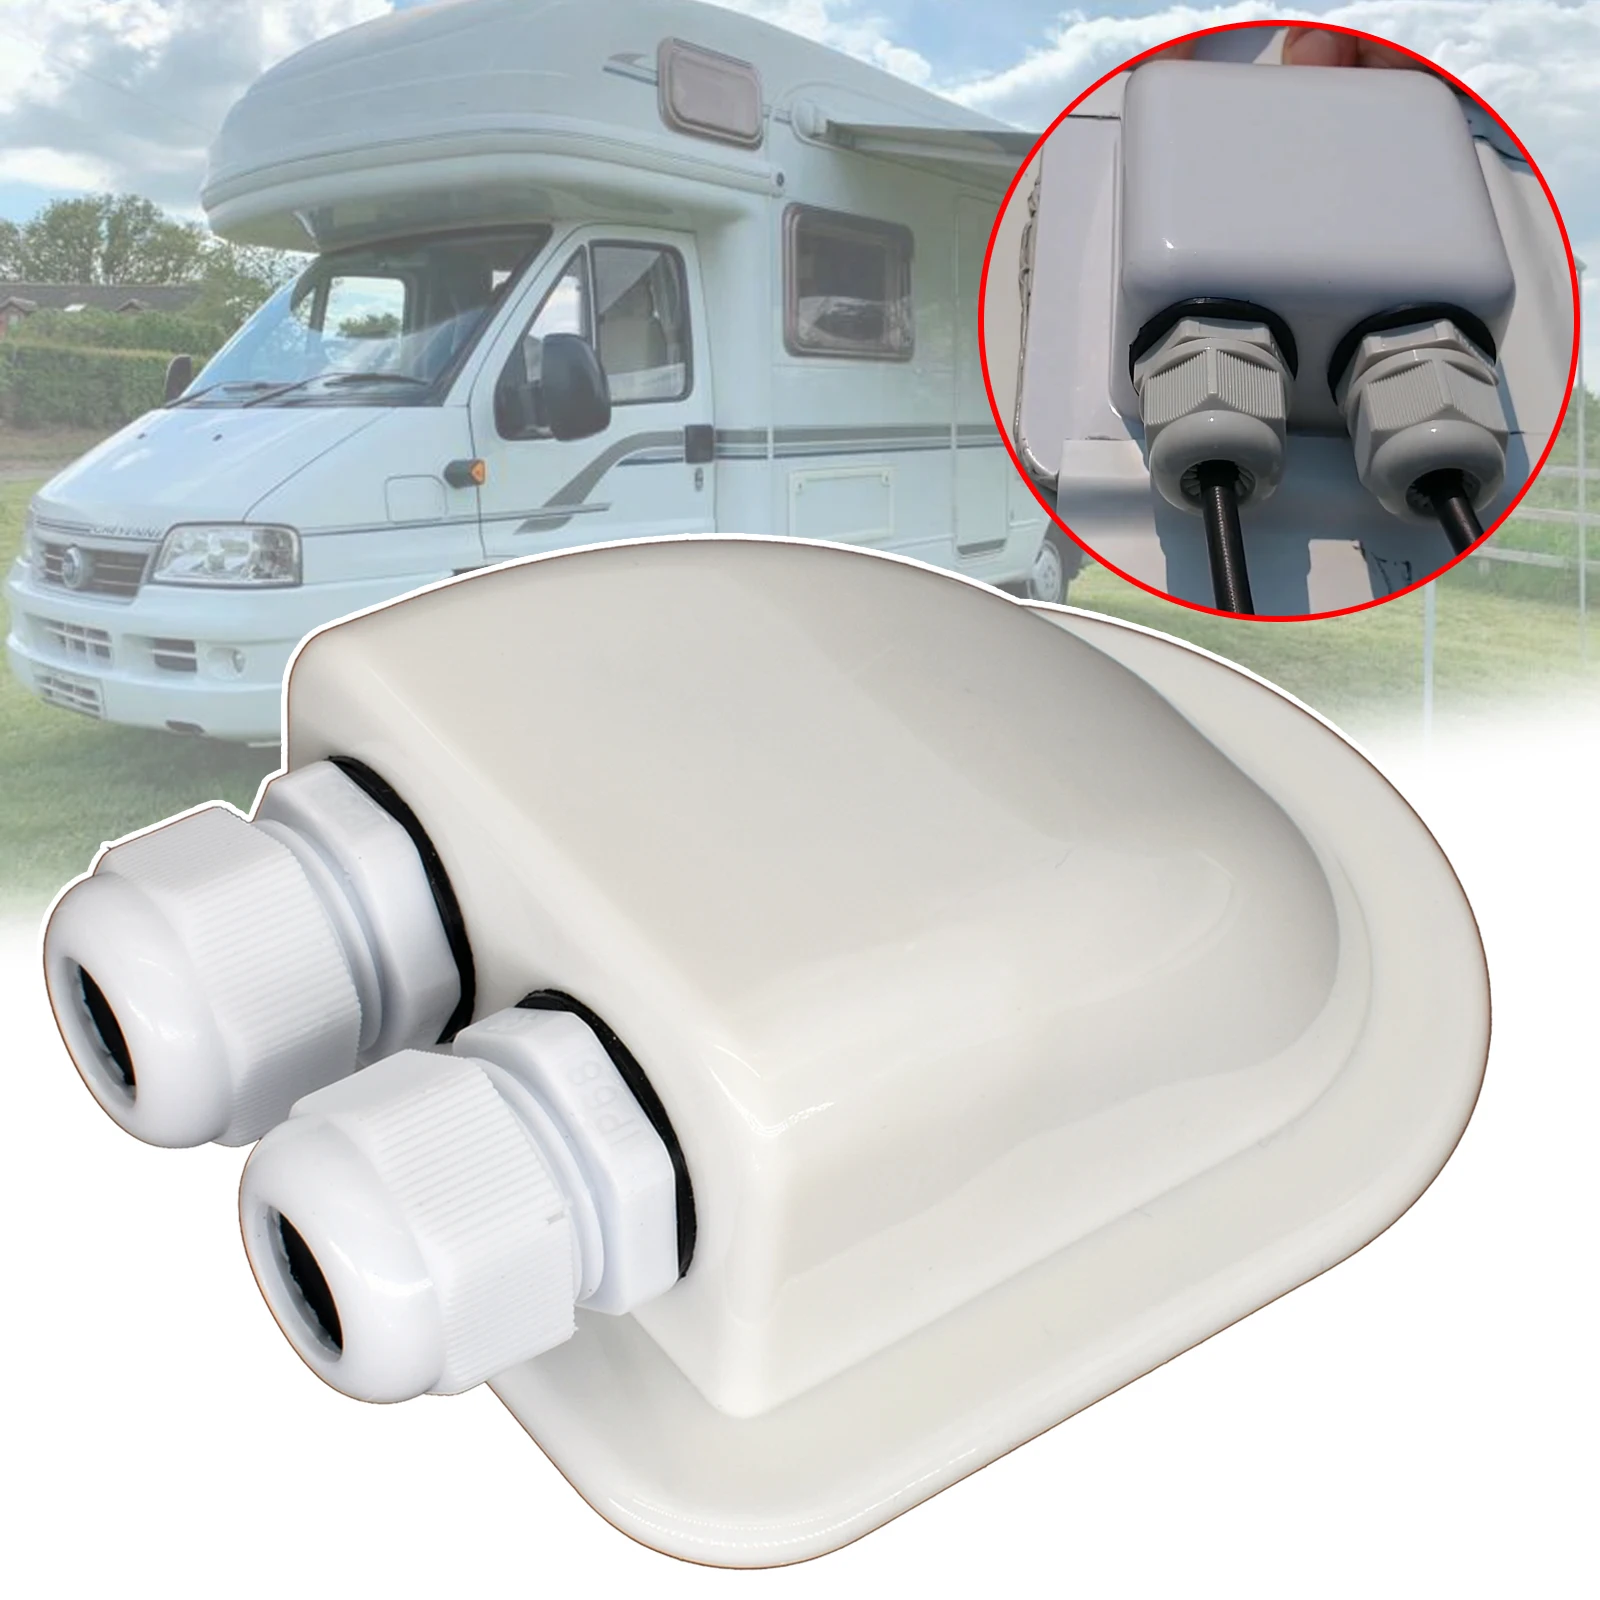 RV Roof Top Junction Box For Solar Panel Wiring Double Hole Cable Entry Gland IP68 Waterproof For RV Yacht Boat Caravan Camper 1 pcs white 6 5 inch 120w boat waterproof speaker sound auto modified horn round flush fitting for yacht marine car rv camper